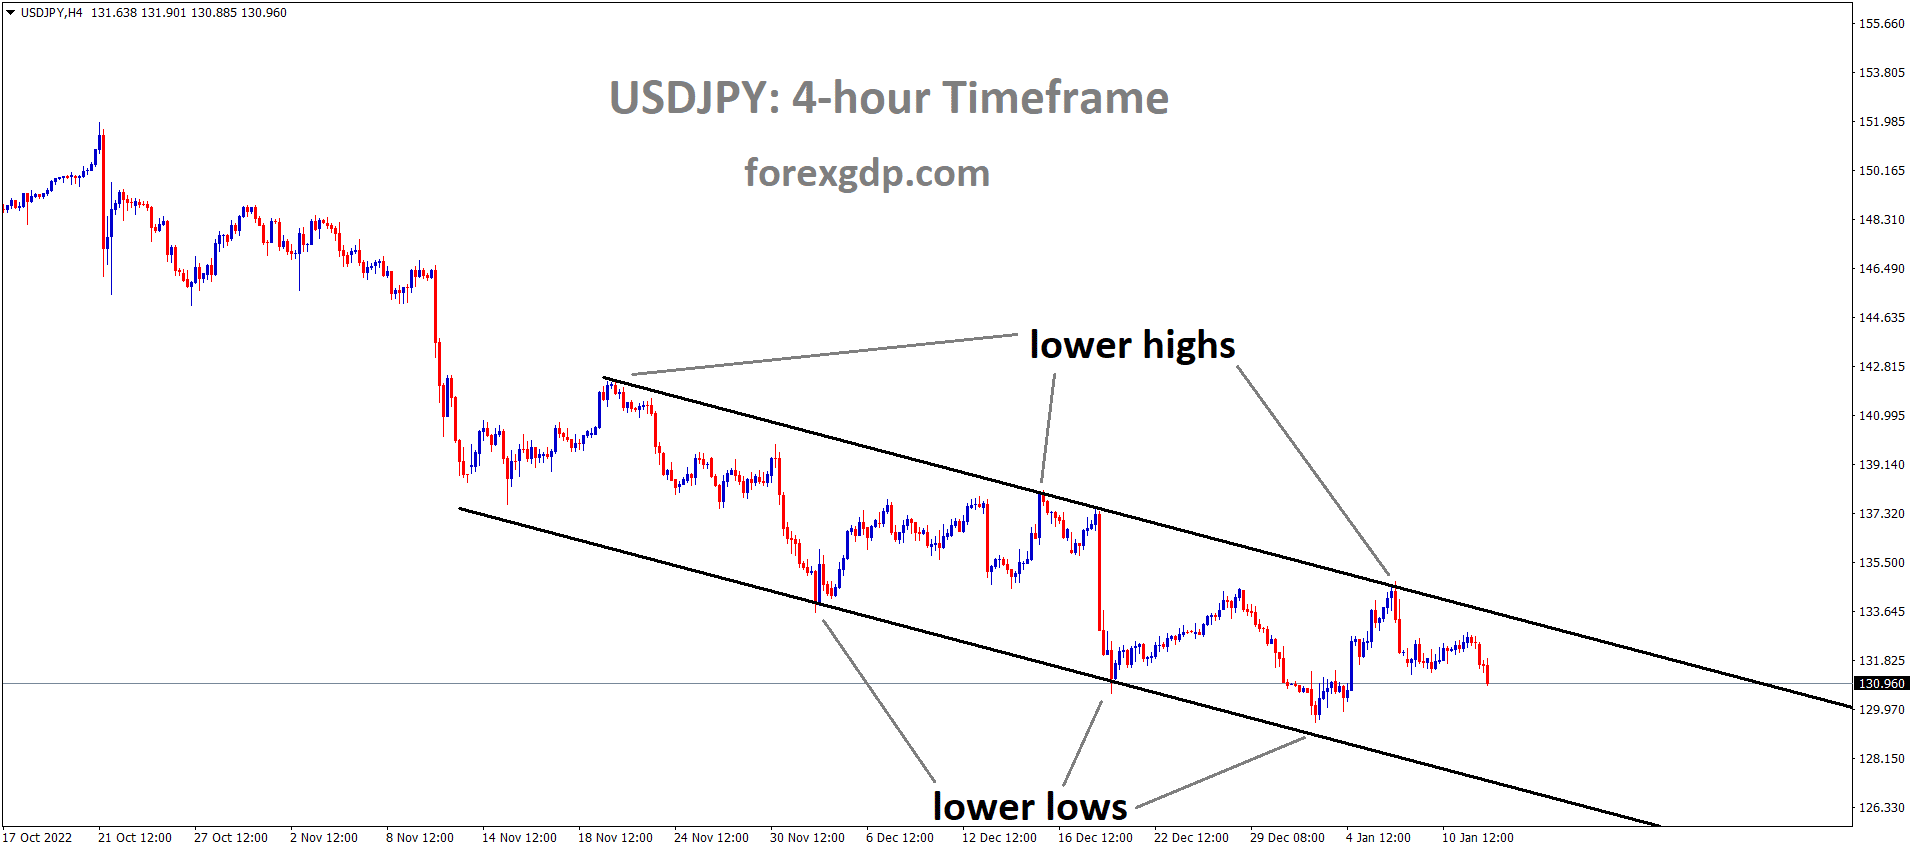 USDJPY is moving in the Descending channel and the market has fallen from the lower high area of the channel 1